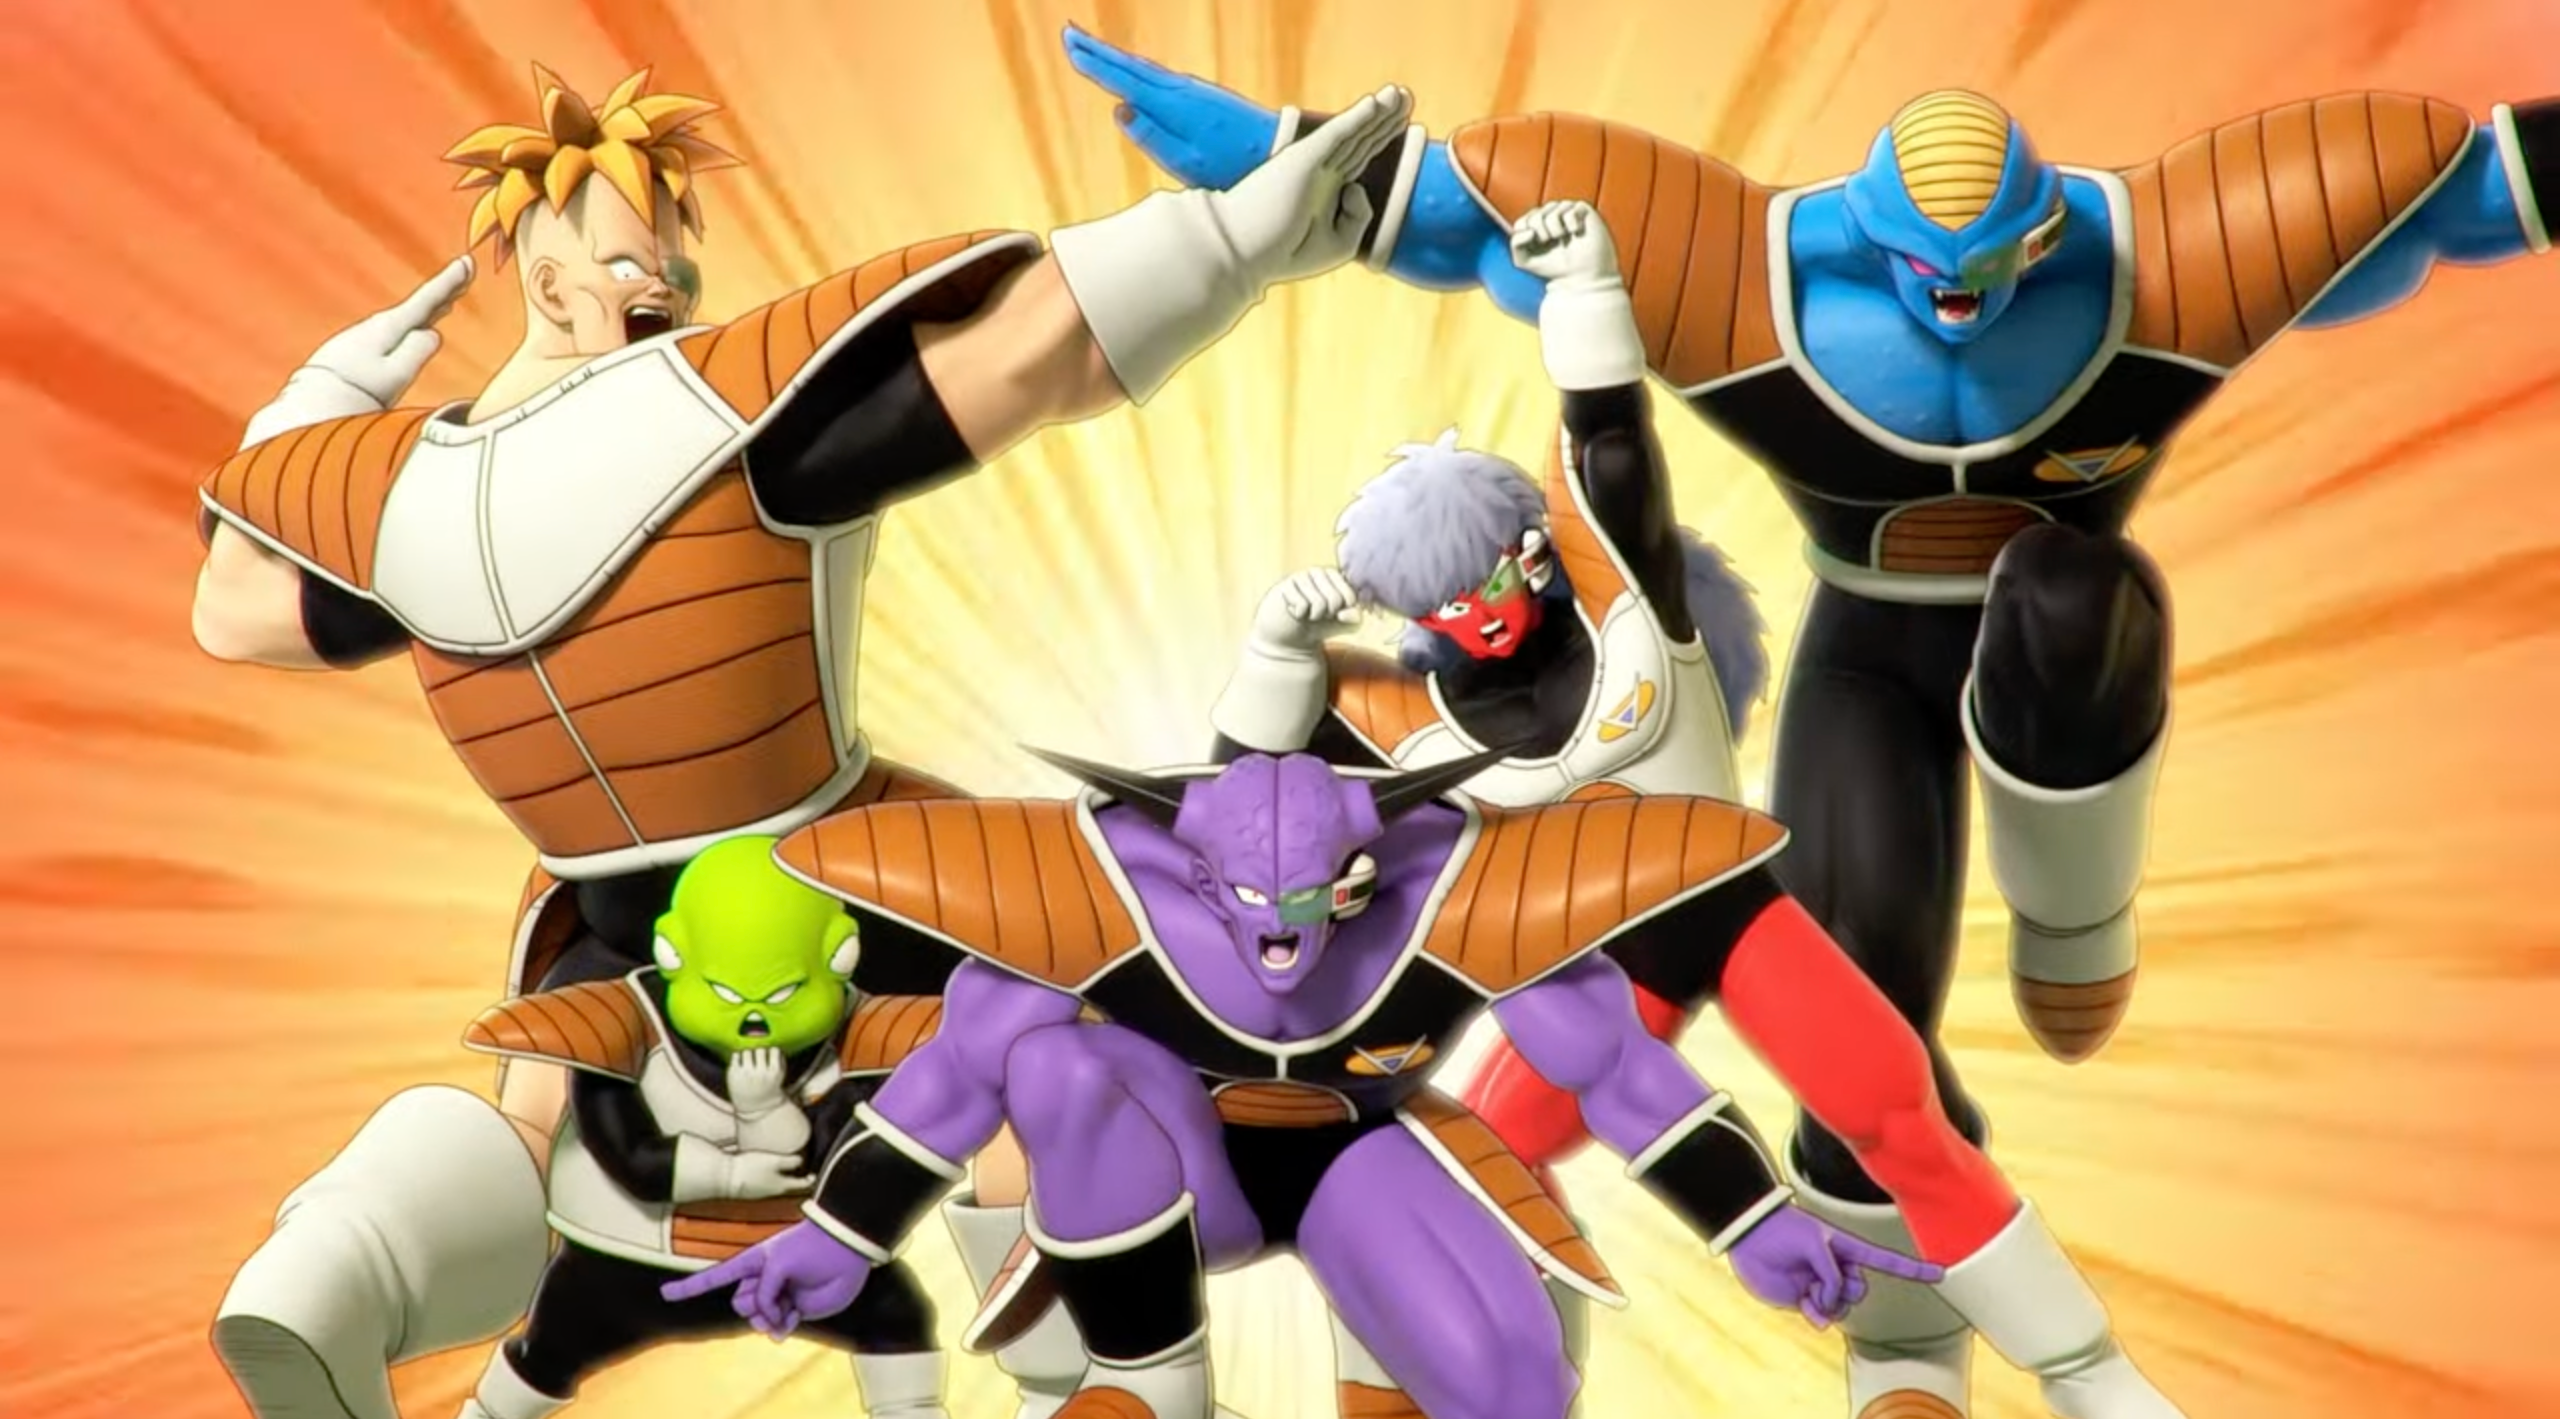 DRAGON BALL: THE BREAKERS PS5